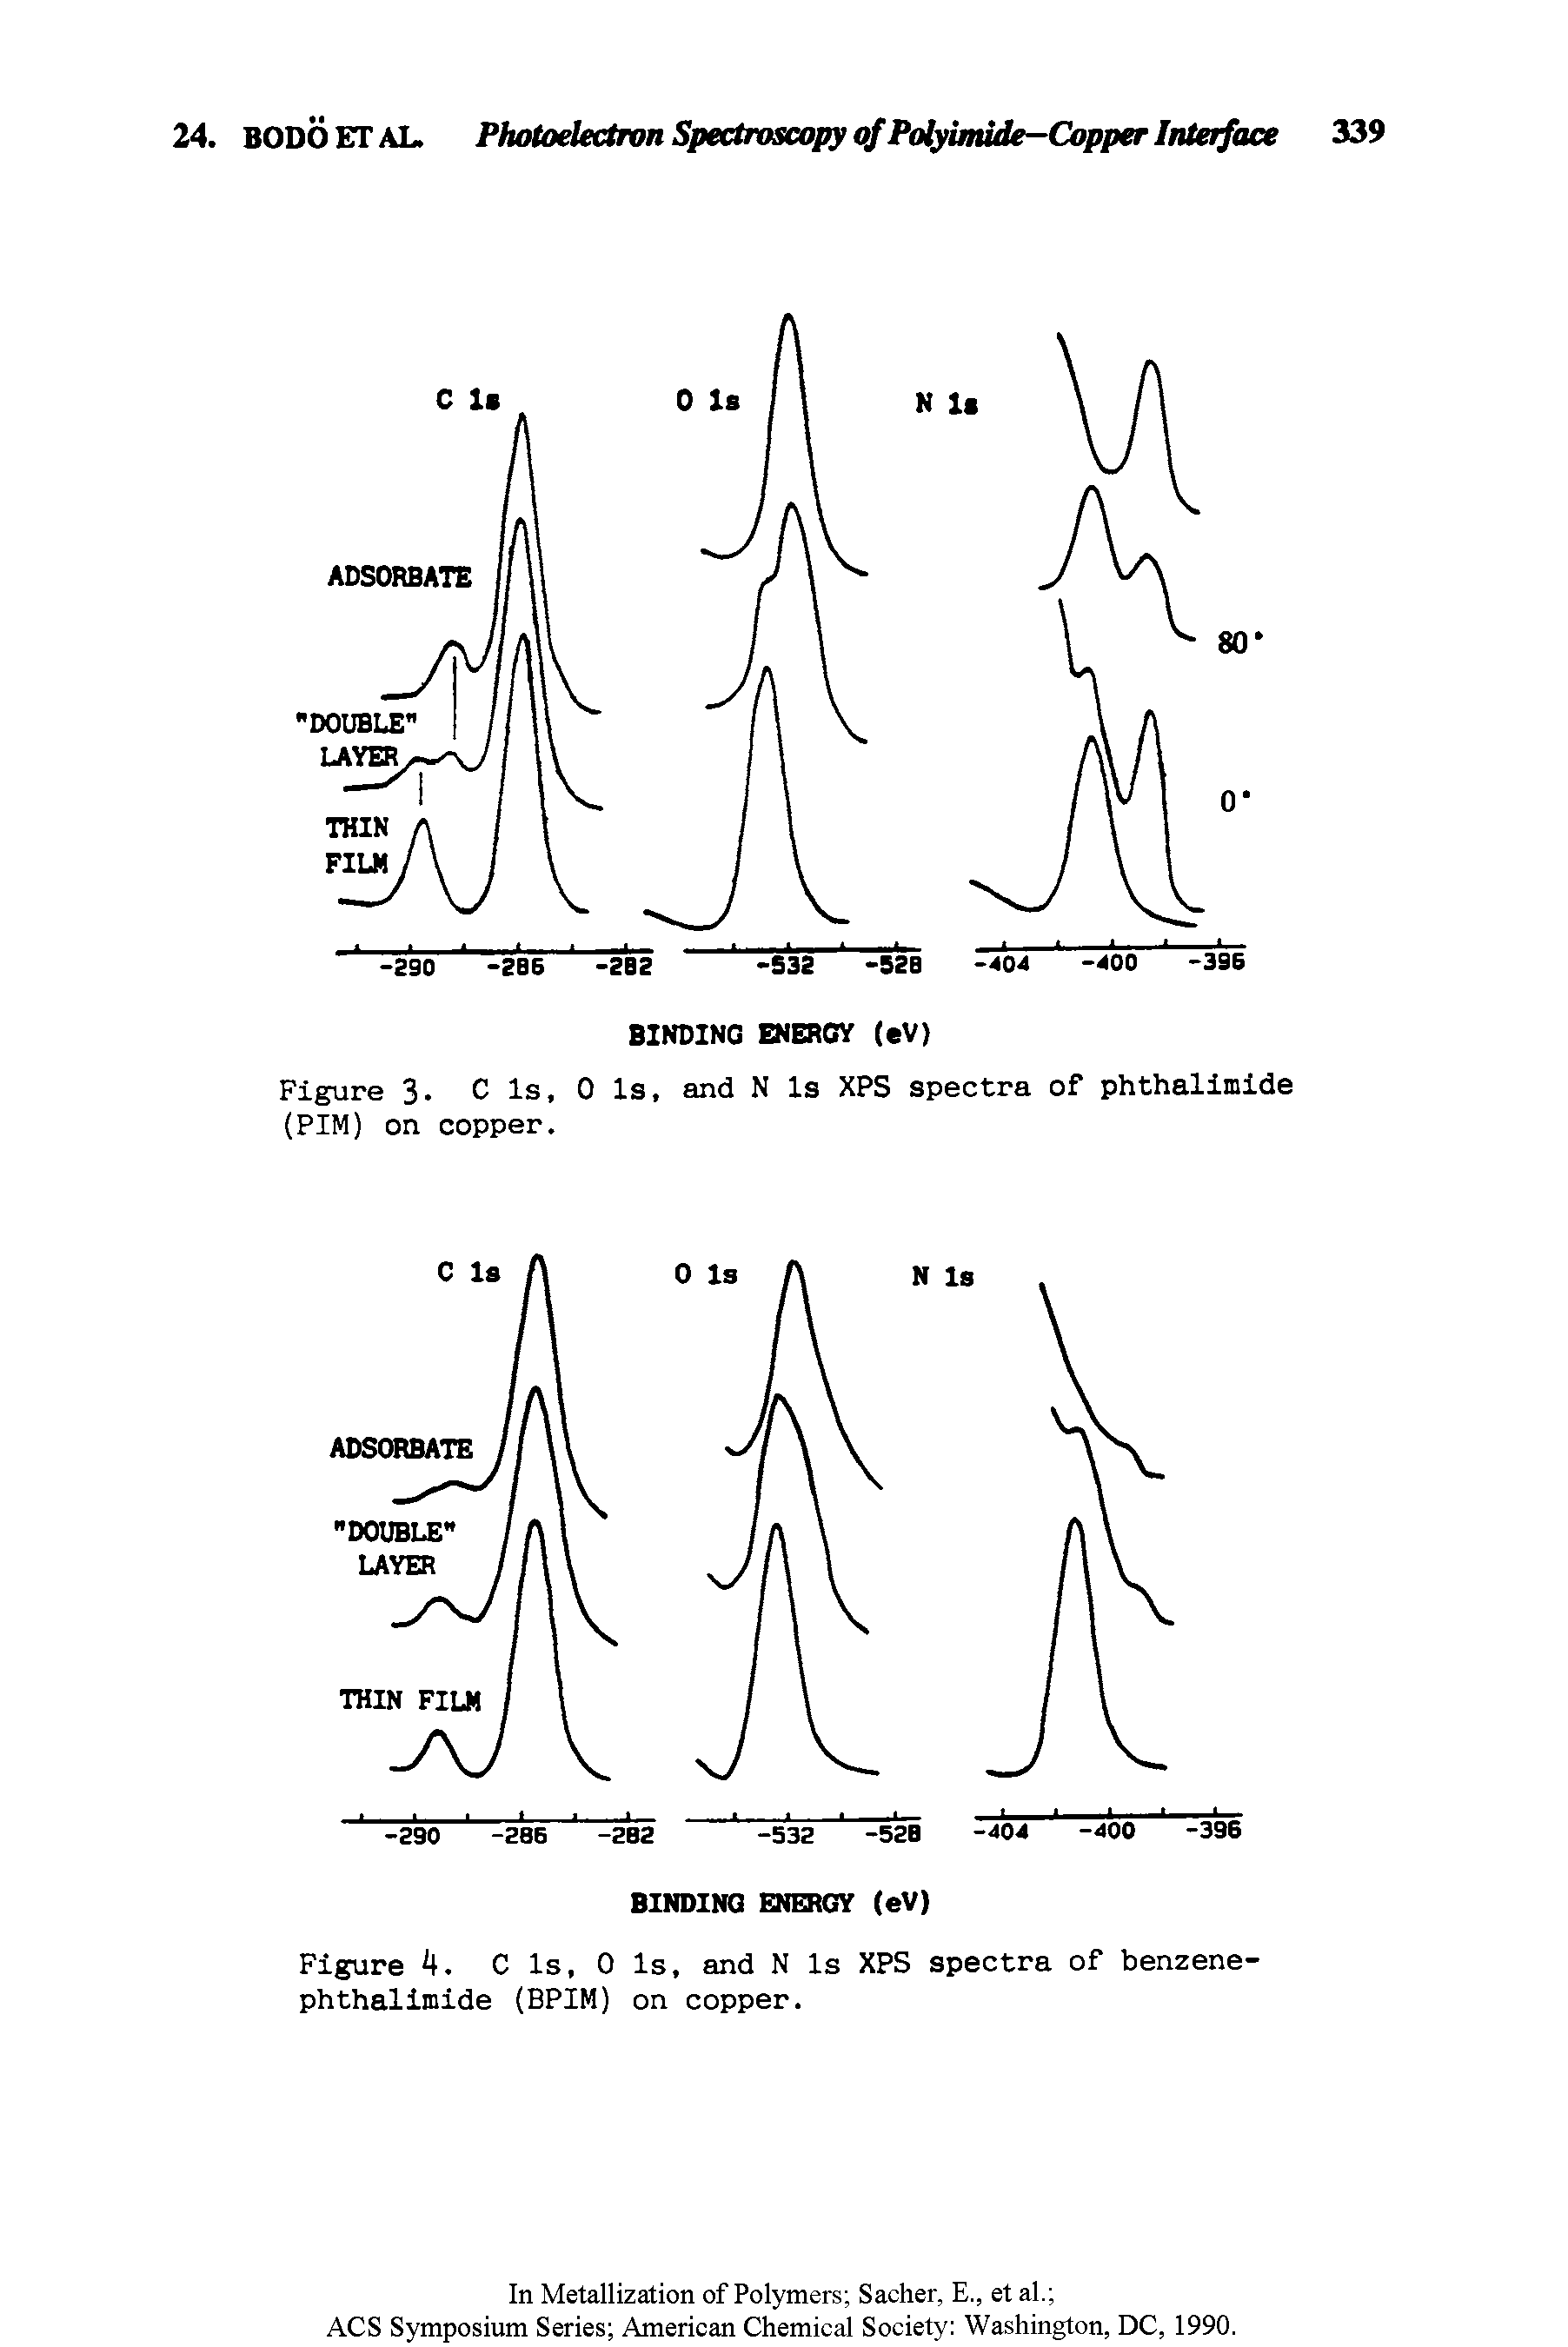 Figure 4. C Is, 0 Is, and N Is XPS spectra of benzene-phthalimide (BPIM) on copper.